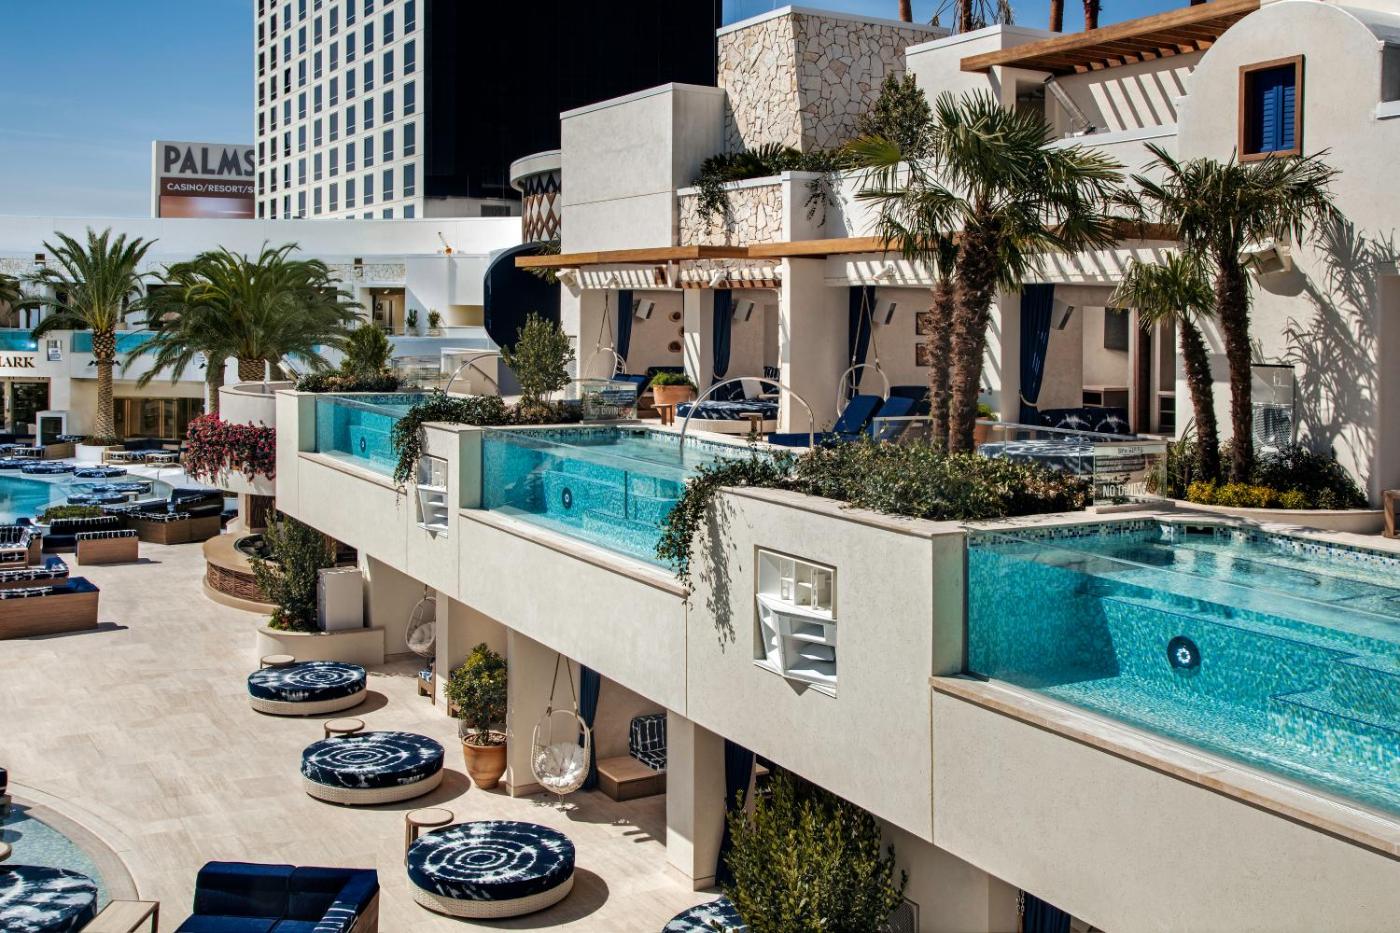 Hotel with private pool - Palms Casino & Resort